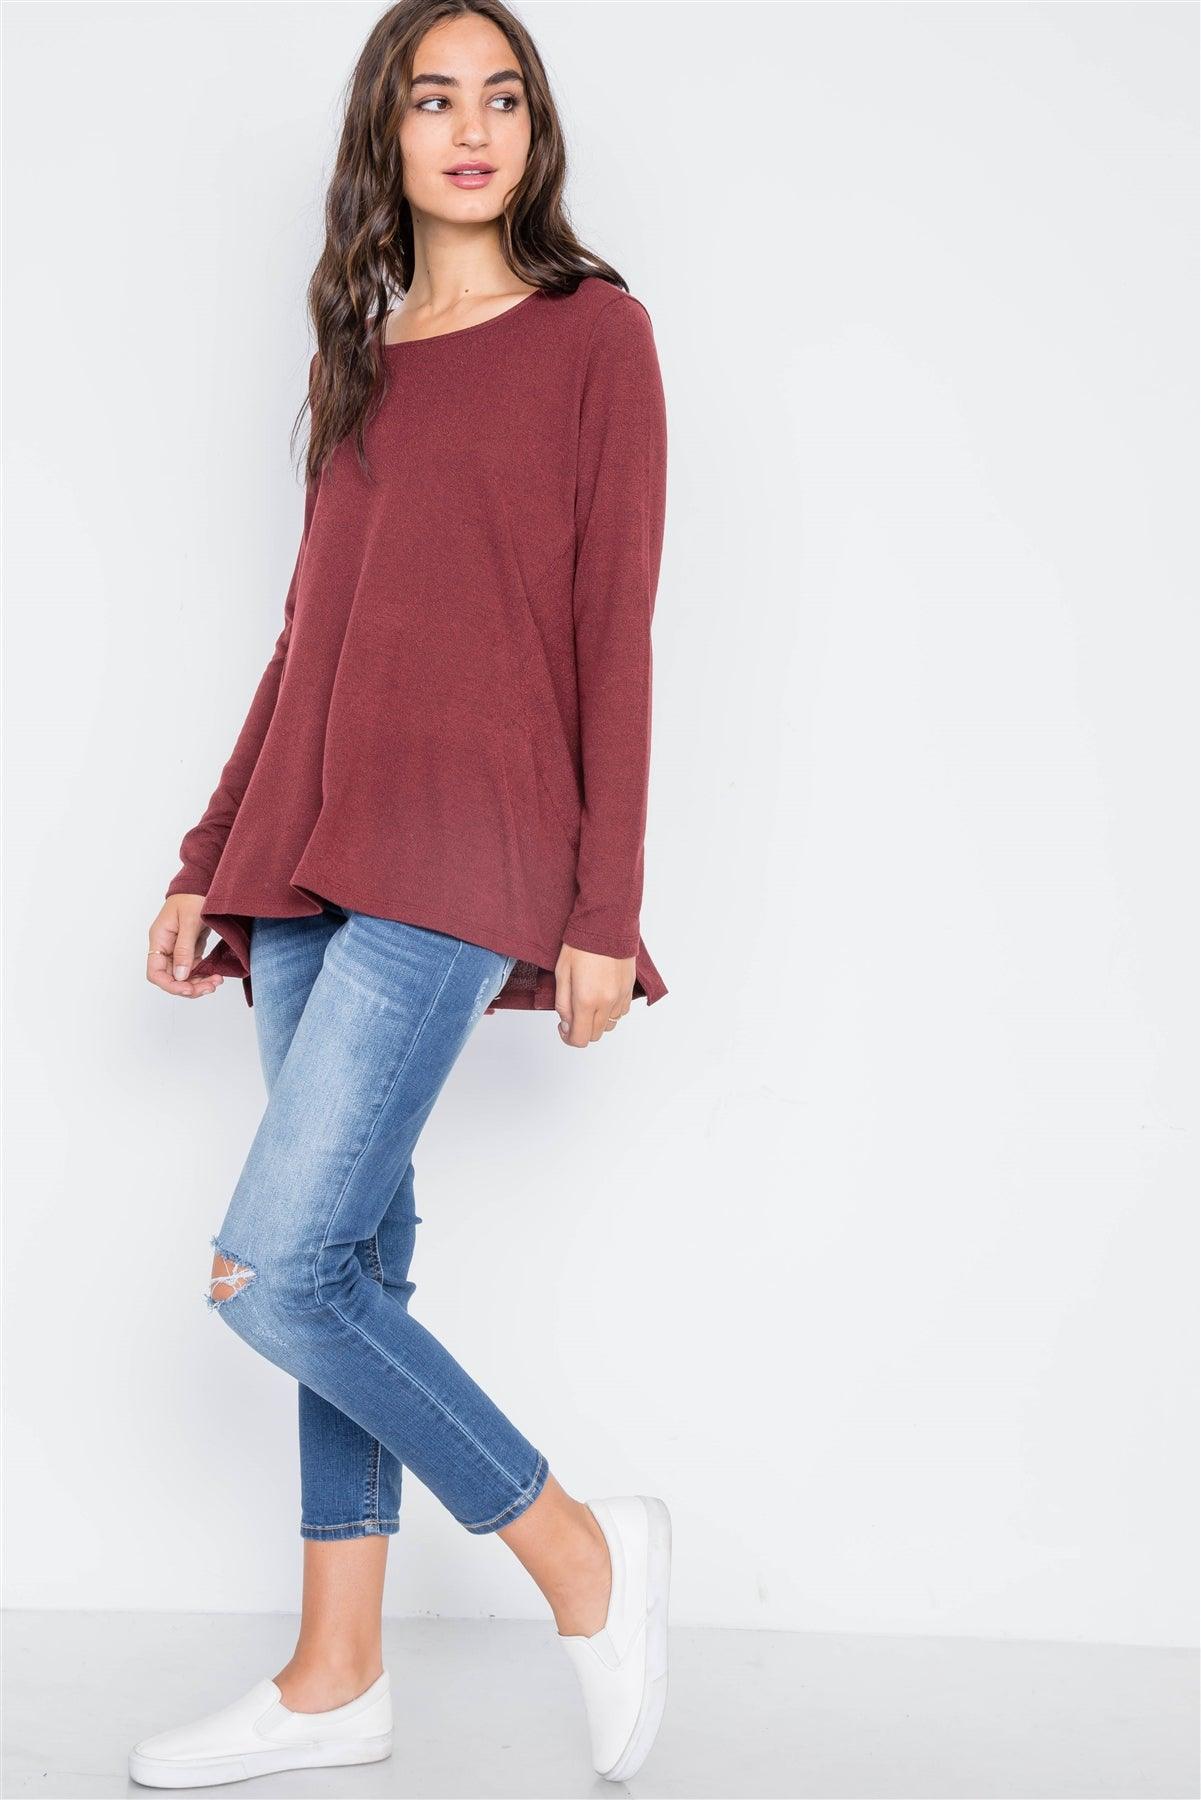 Wine Long Sleeve Loose Fit Solid Top